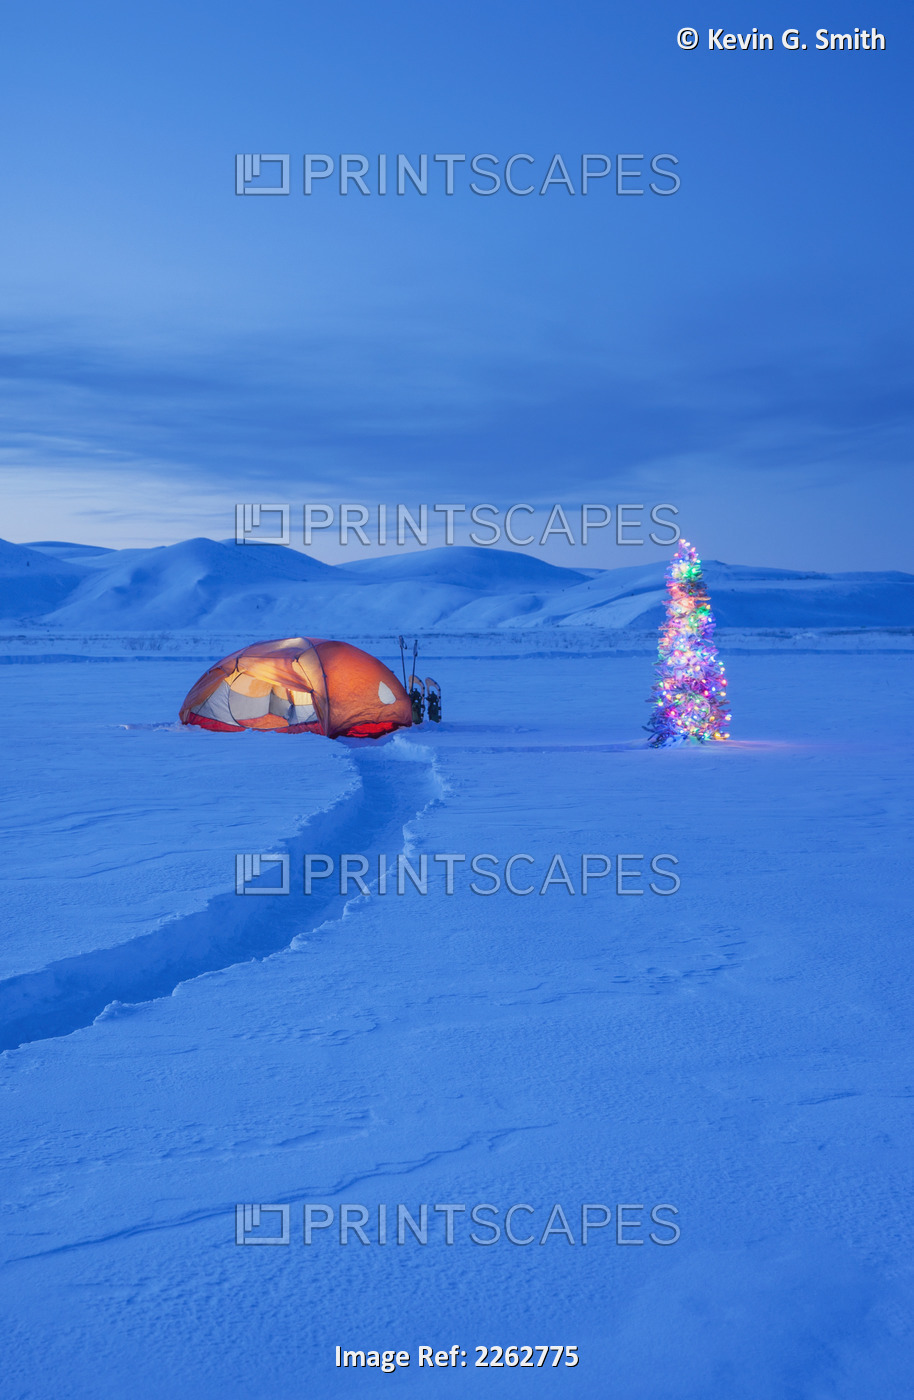 A Path Through The Snow Leads To A Backpacking Tent Lit Up At Dawn With A ...